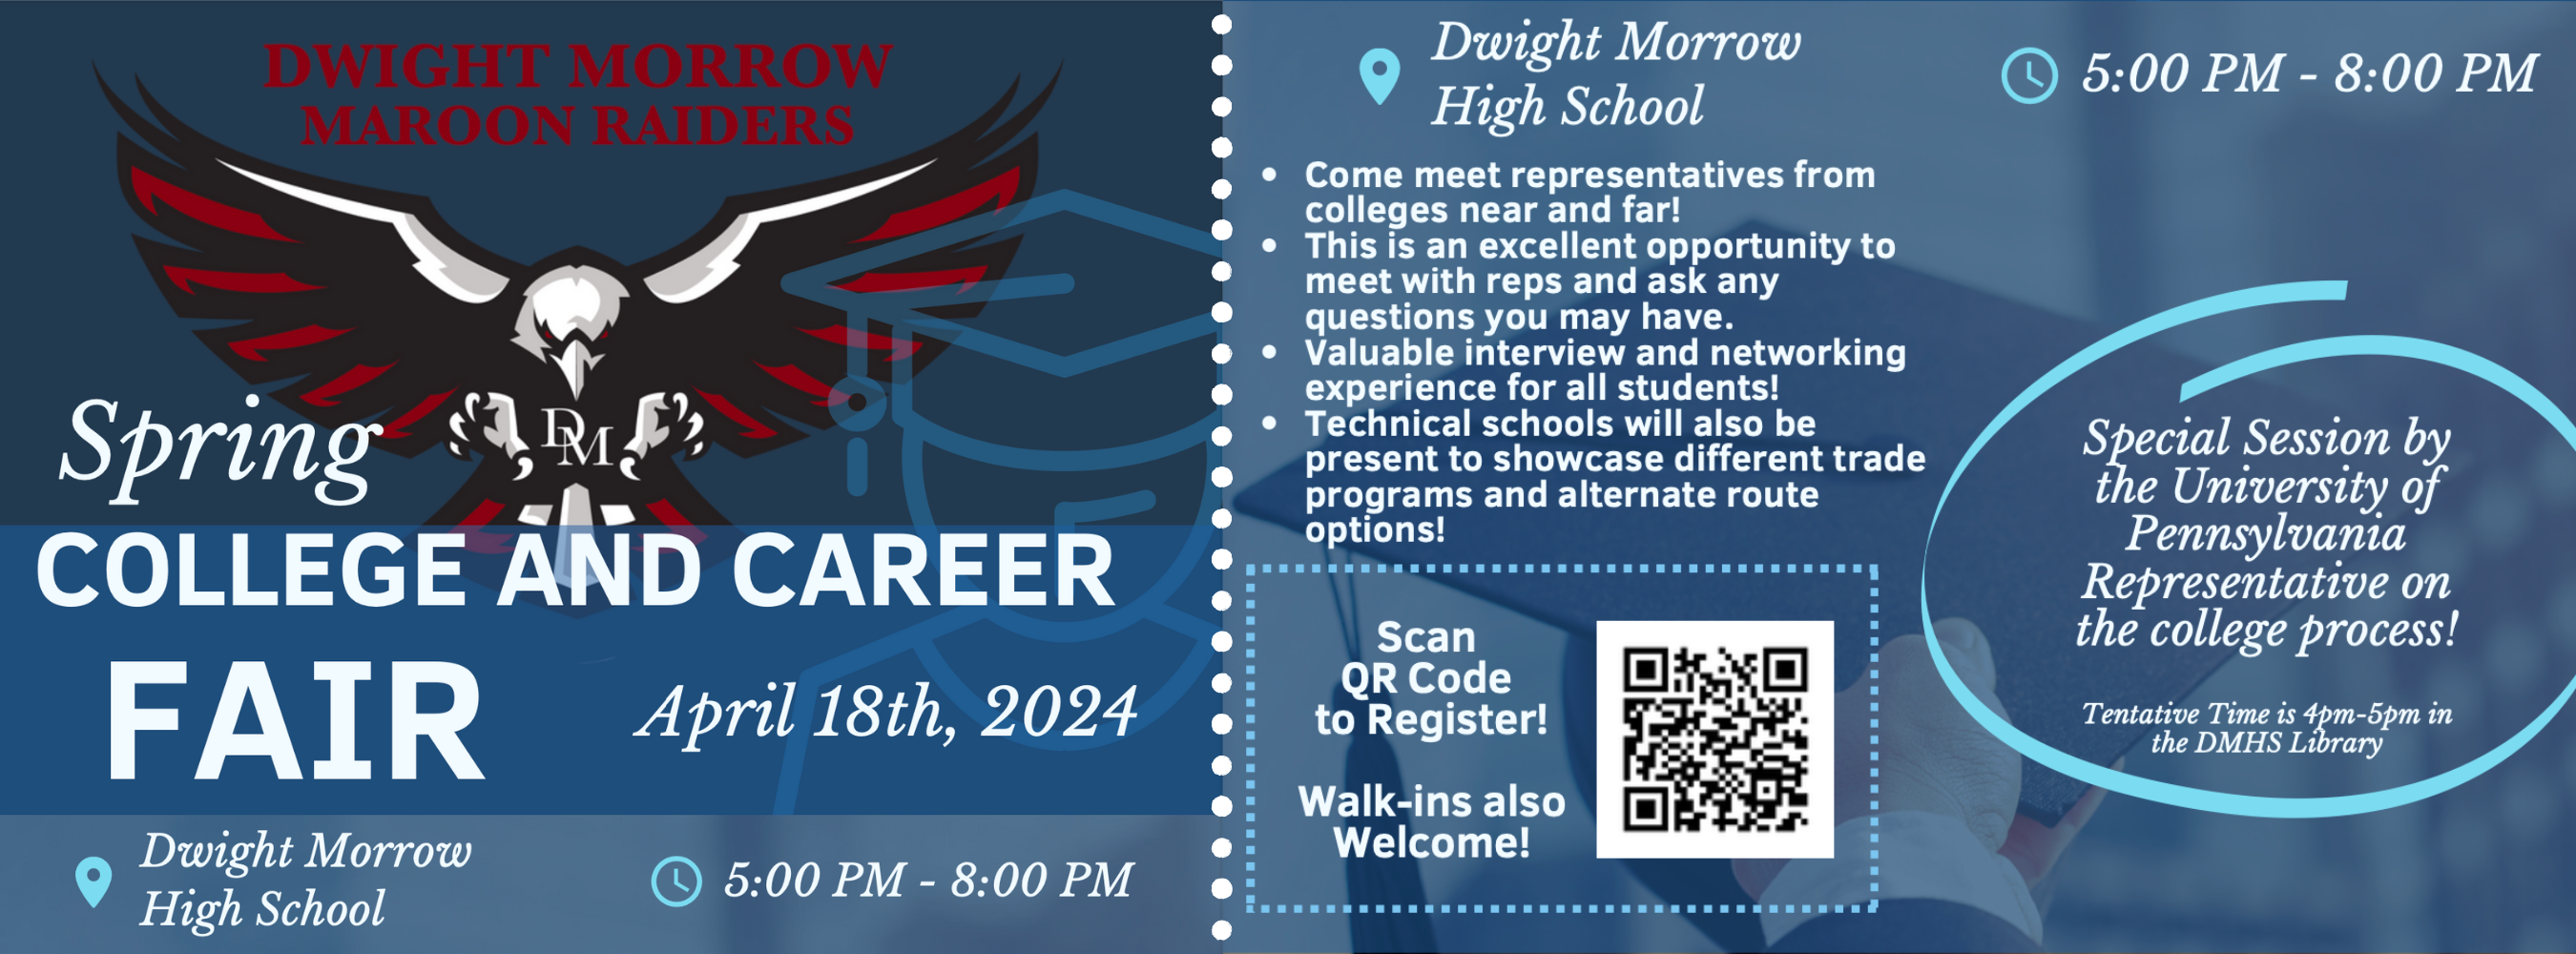 Spring College and Career Fair